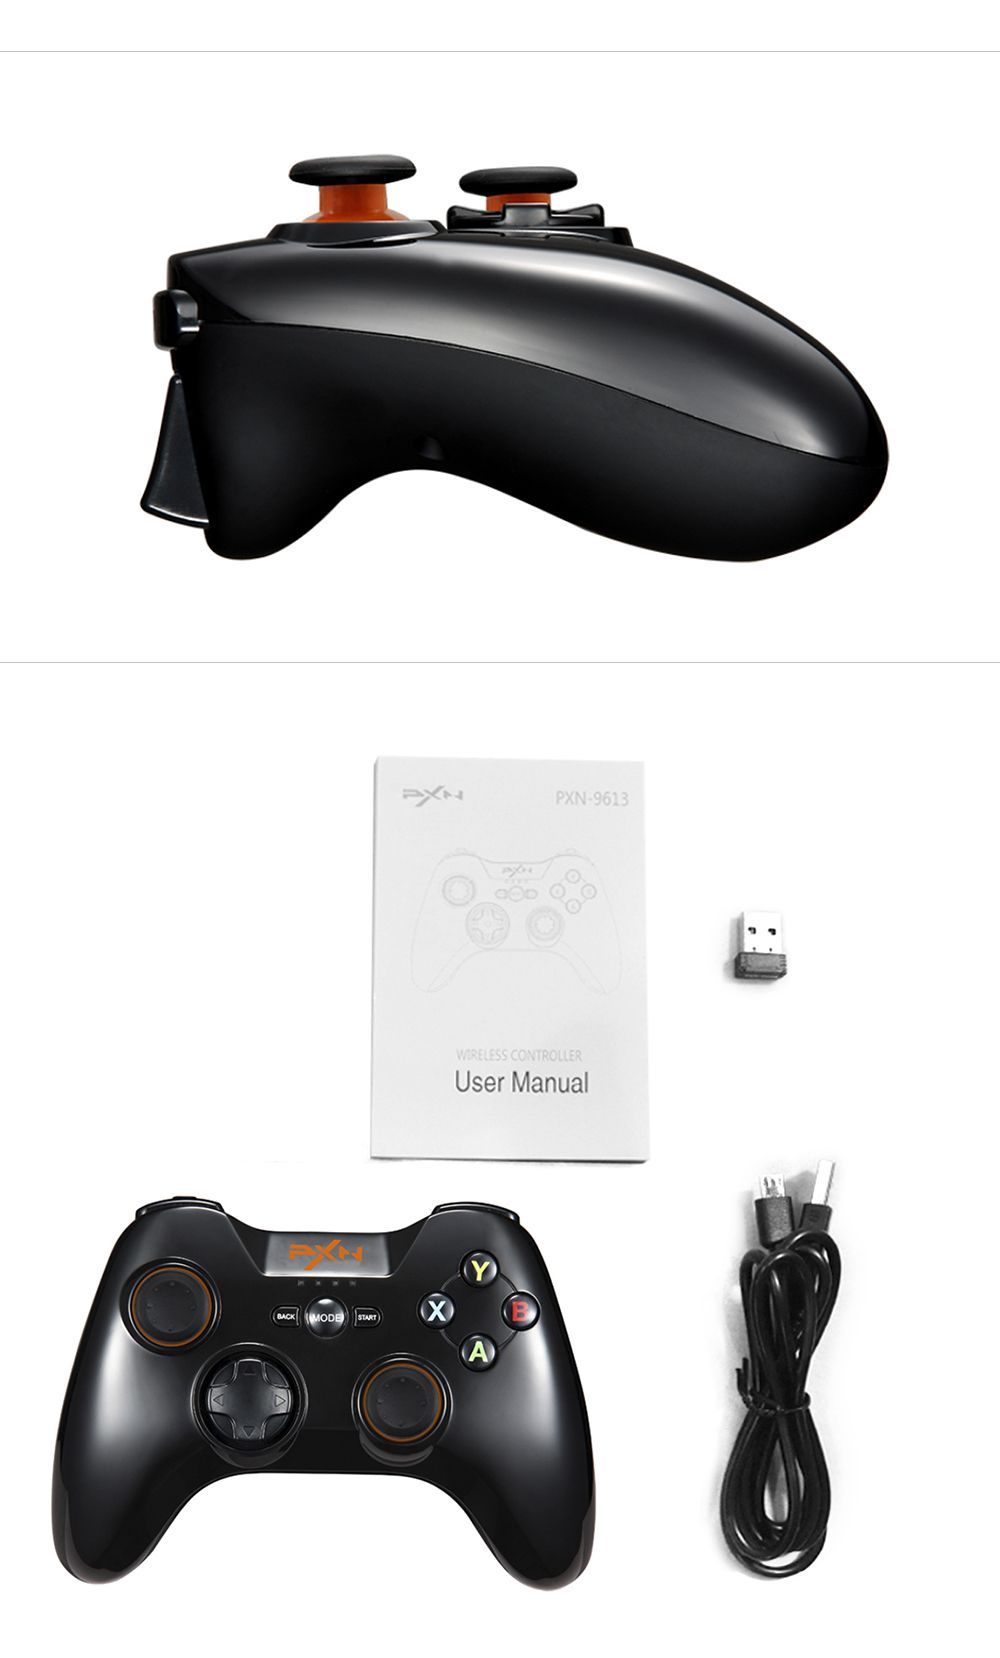 PXN-PXN-9613-Wireless-bluetooth-Game-Controller-Portable-Gamepad-for-PC-Tablet-Android-Smartphone-TV-1742322